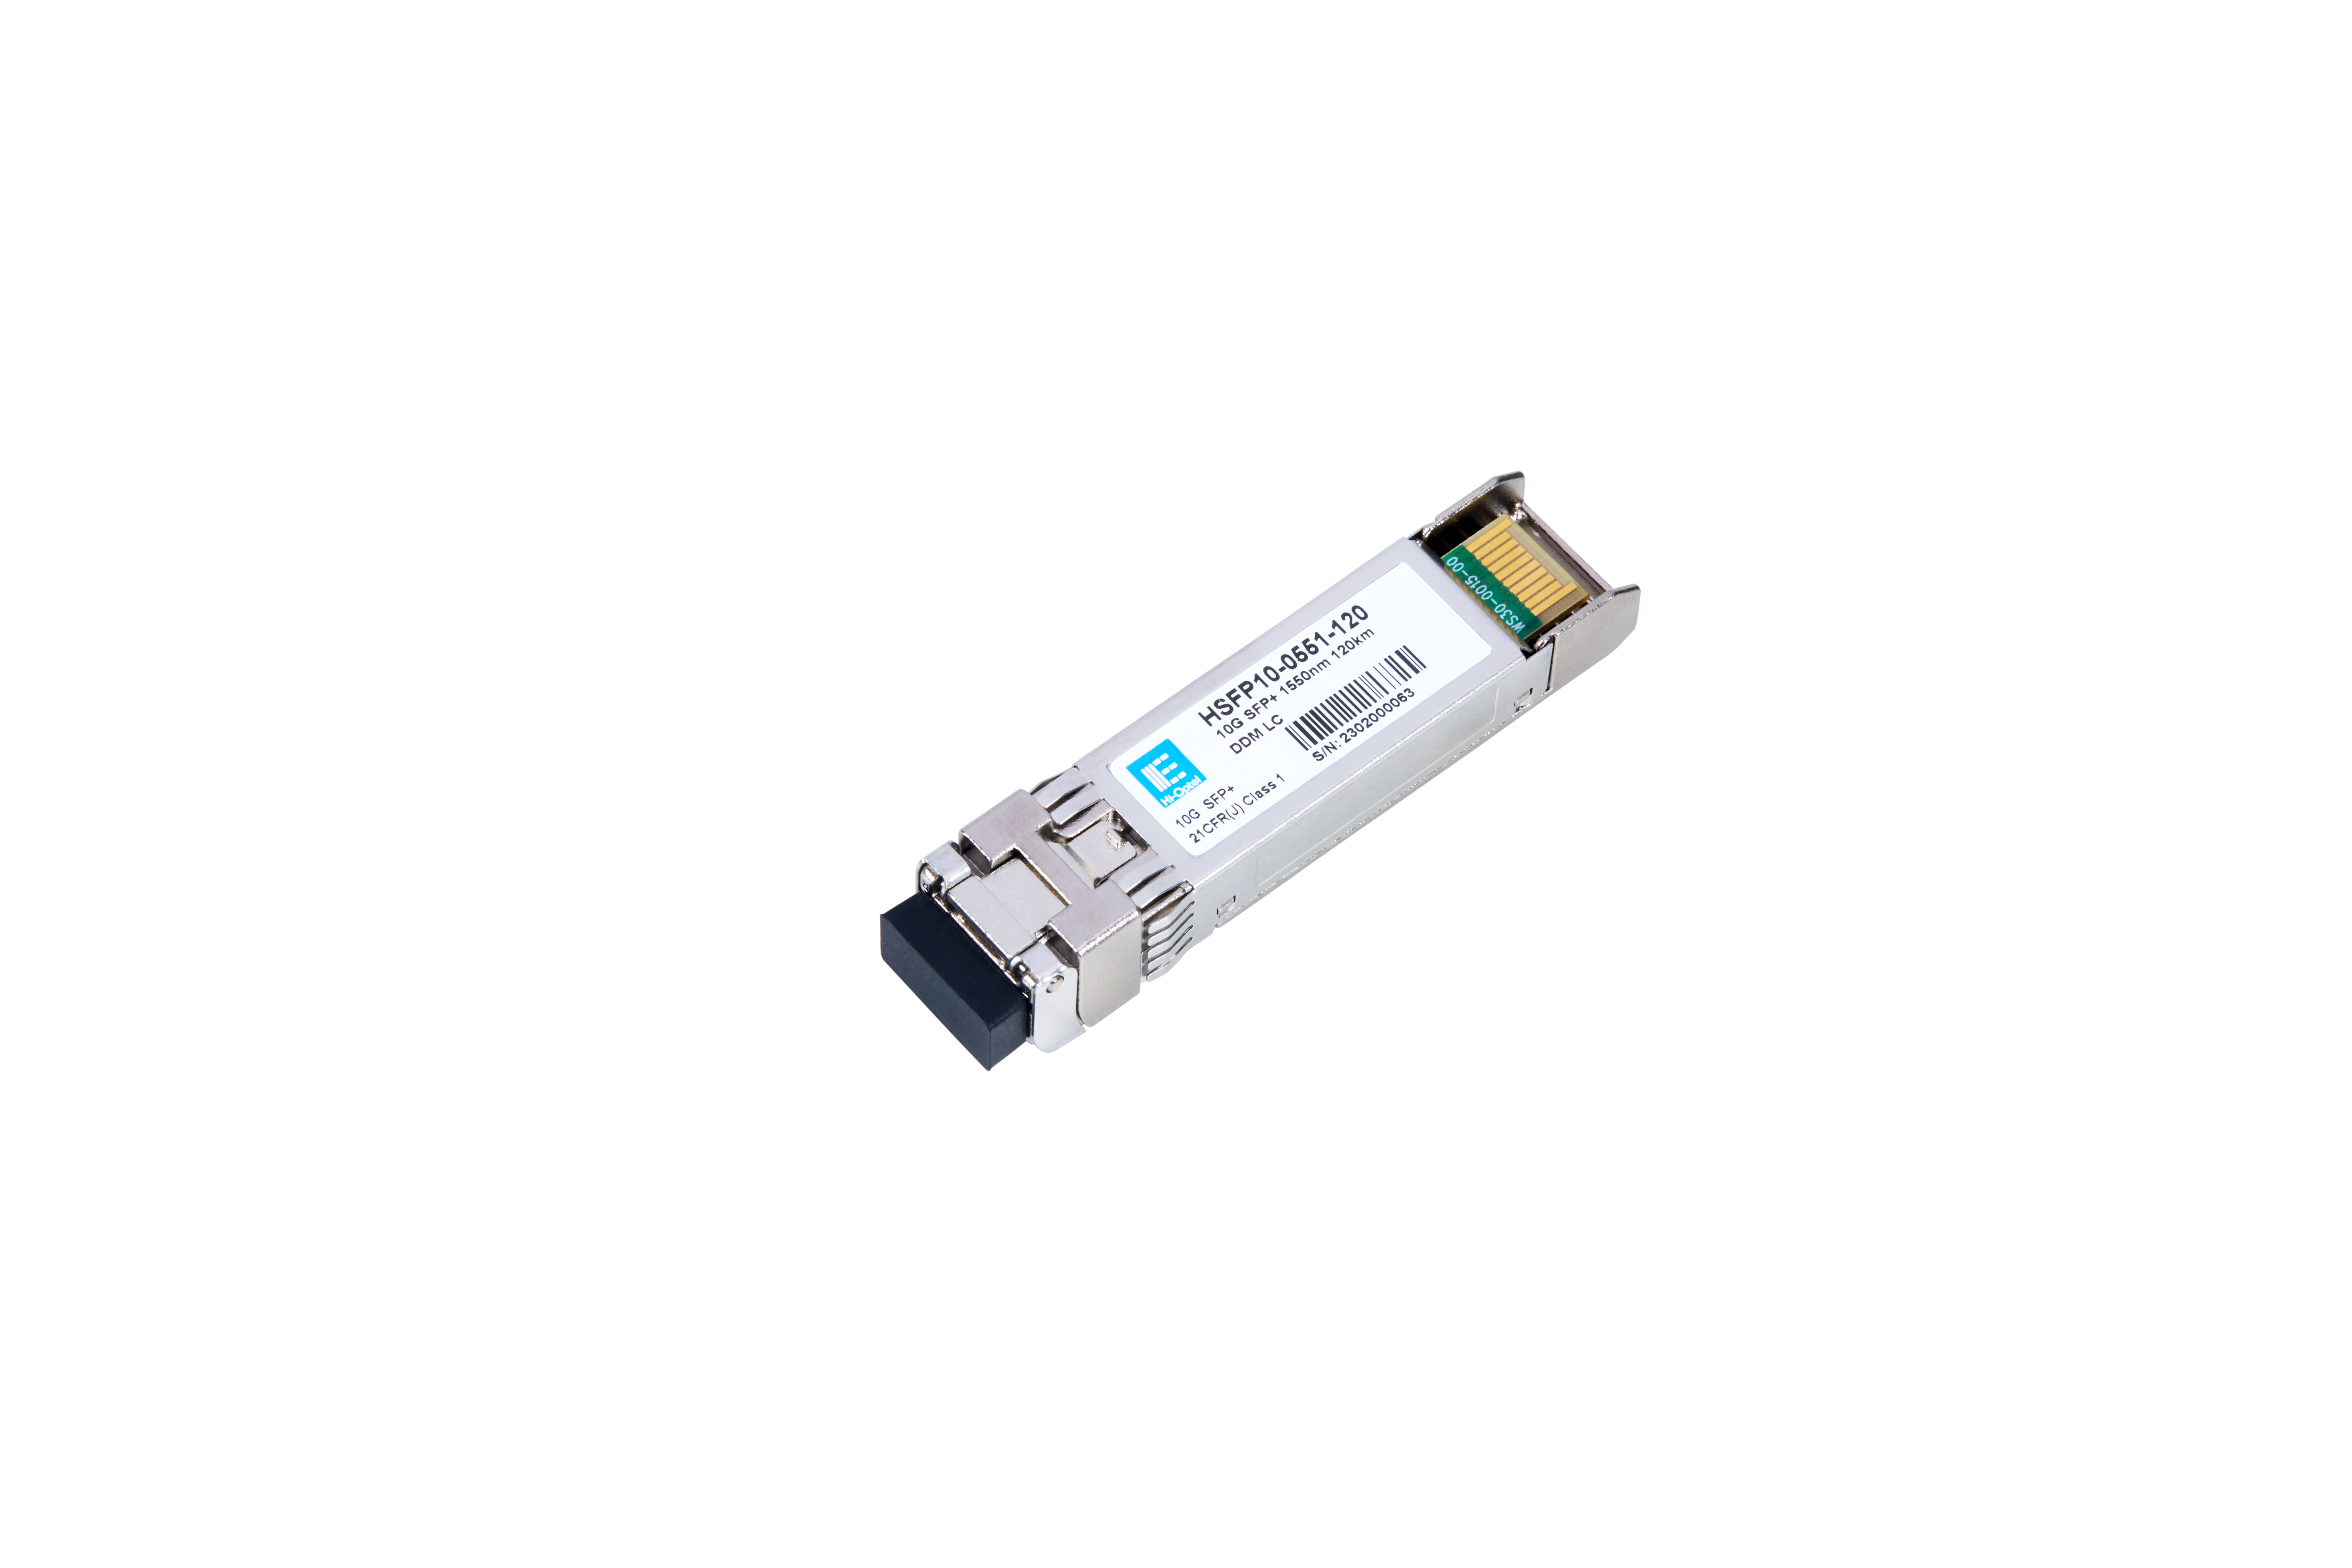 10GBASE-ZR SFP+ 1550nm 120km Hi-Optel HSFP10-0550-120 module Featured Image